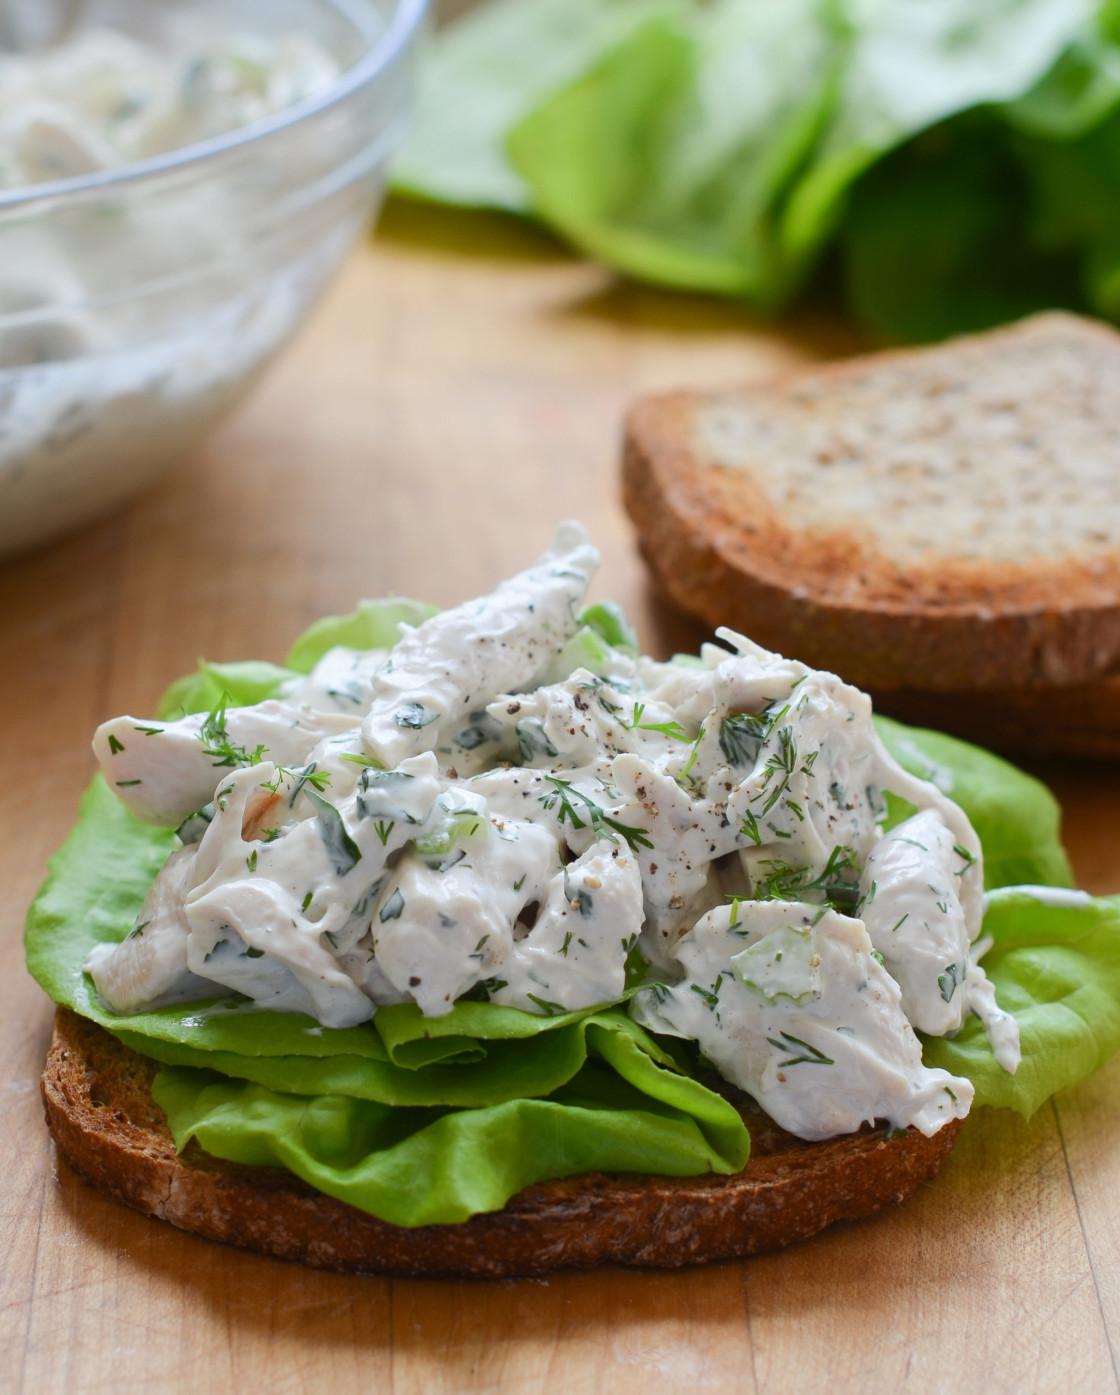 Classic Chicken Salad Once Upon A Chef A Great Basic Recipe 0202